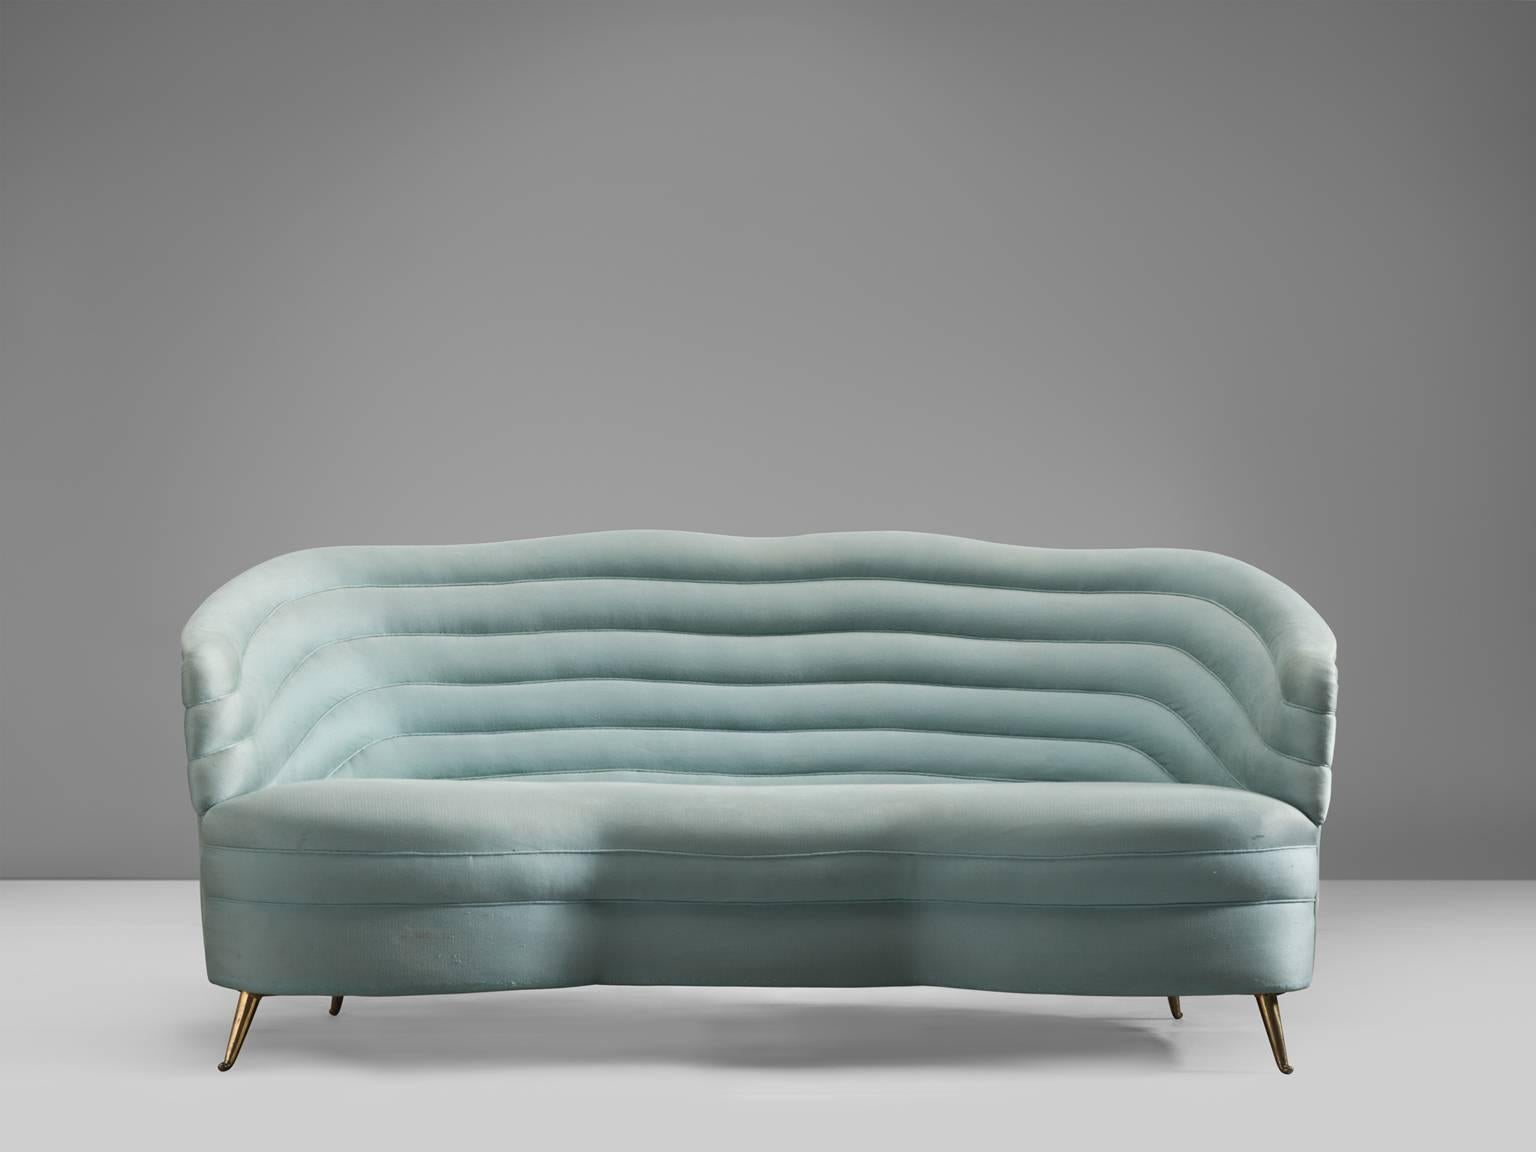 Andrea Busiri Vici, sofa in velvet and metal, Italy, 1960s.

This elegant sofa features an aquamarine, light-blue velvet. The term organic seems to be invented for this settee as it resembles something like a rock formation or waved entity. On the